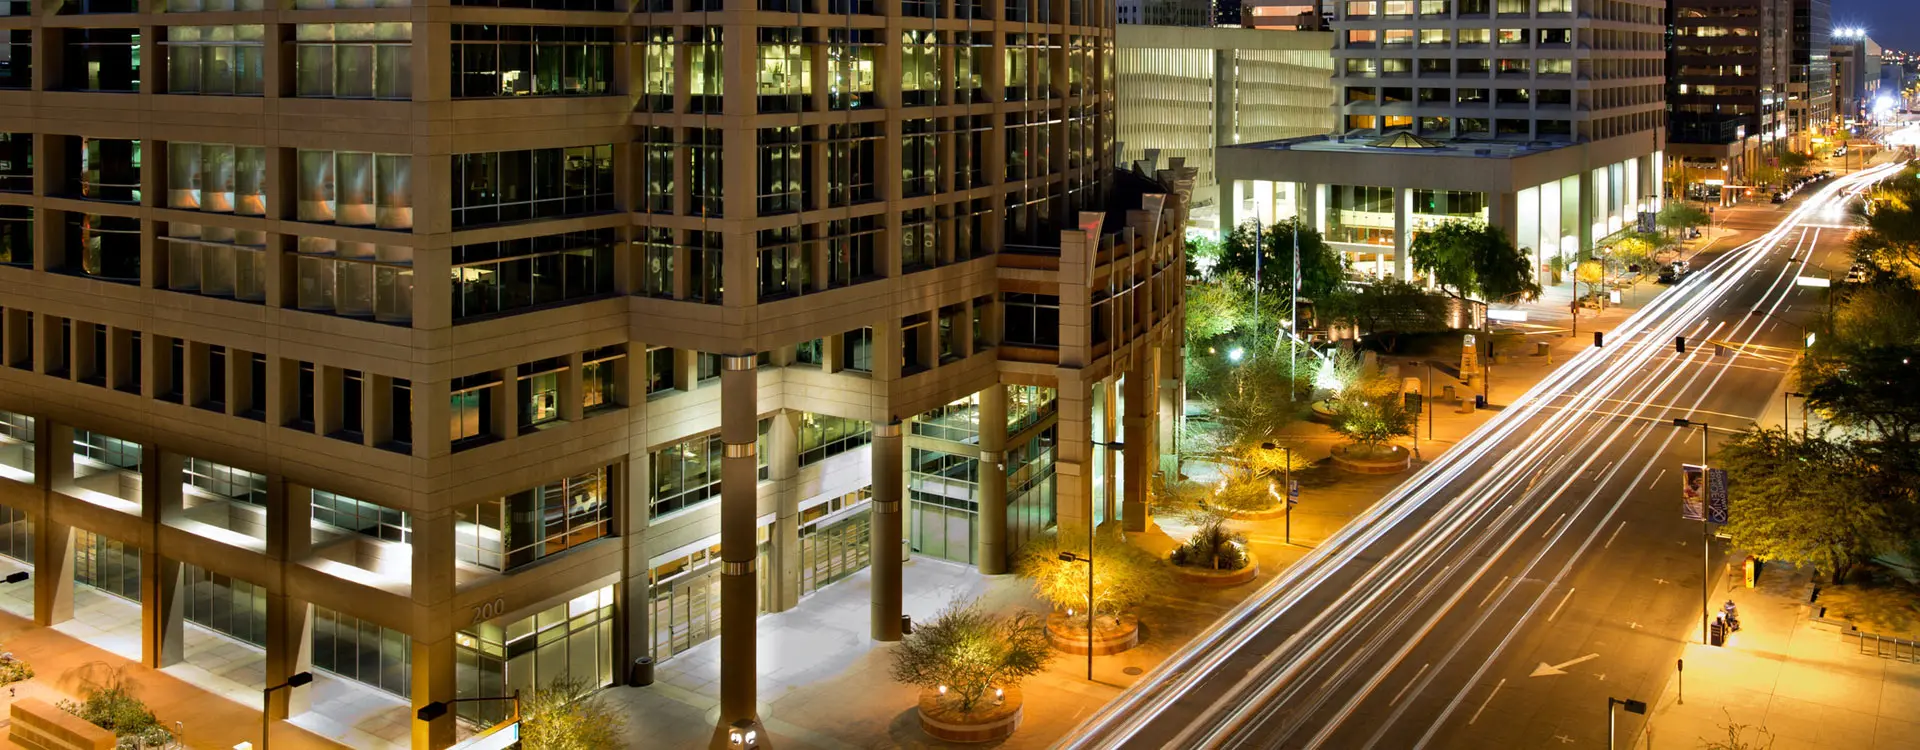 Downtown Arizona Security Solutions - Electronic Security Concepts